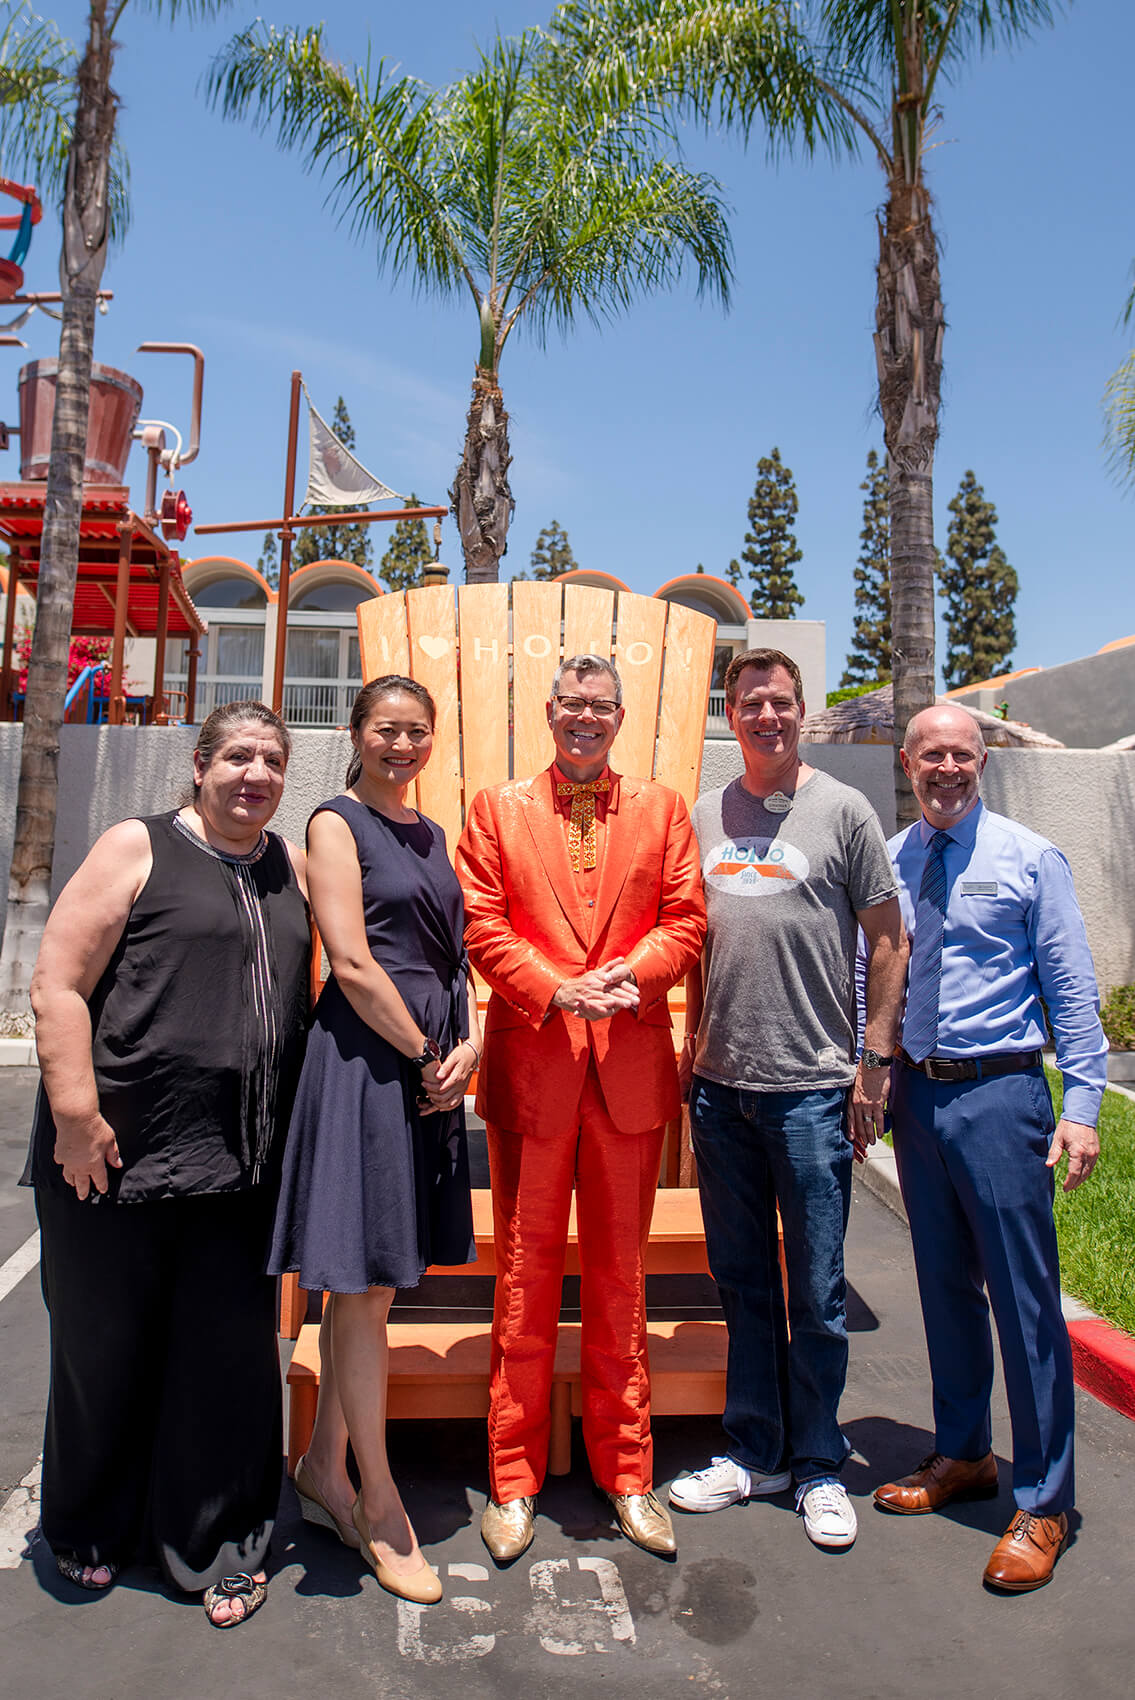 From left to right:  Lina Ramirez (Director of Franchise Operations),  Cynthia Liu (Howard Johnson International, Brand Vice President), Charles Phoenix (pop culture historian), Jonathan Whitehead (General Manager), Bill Cleaver.